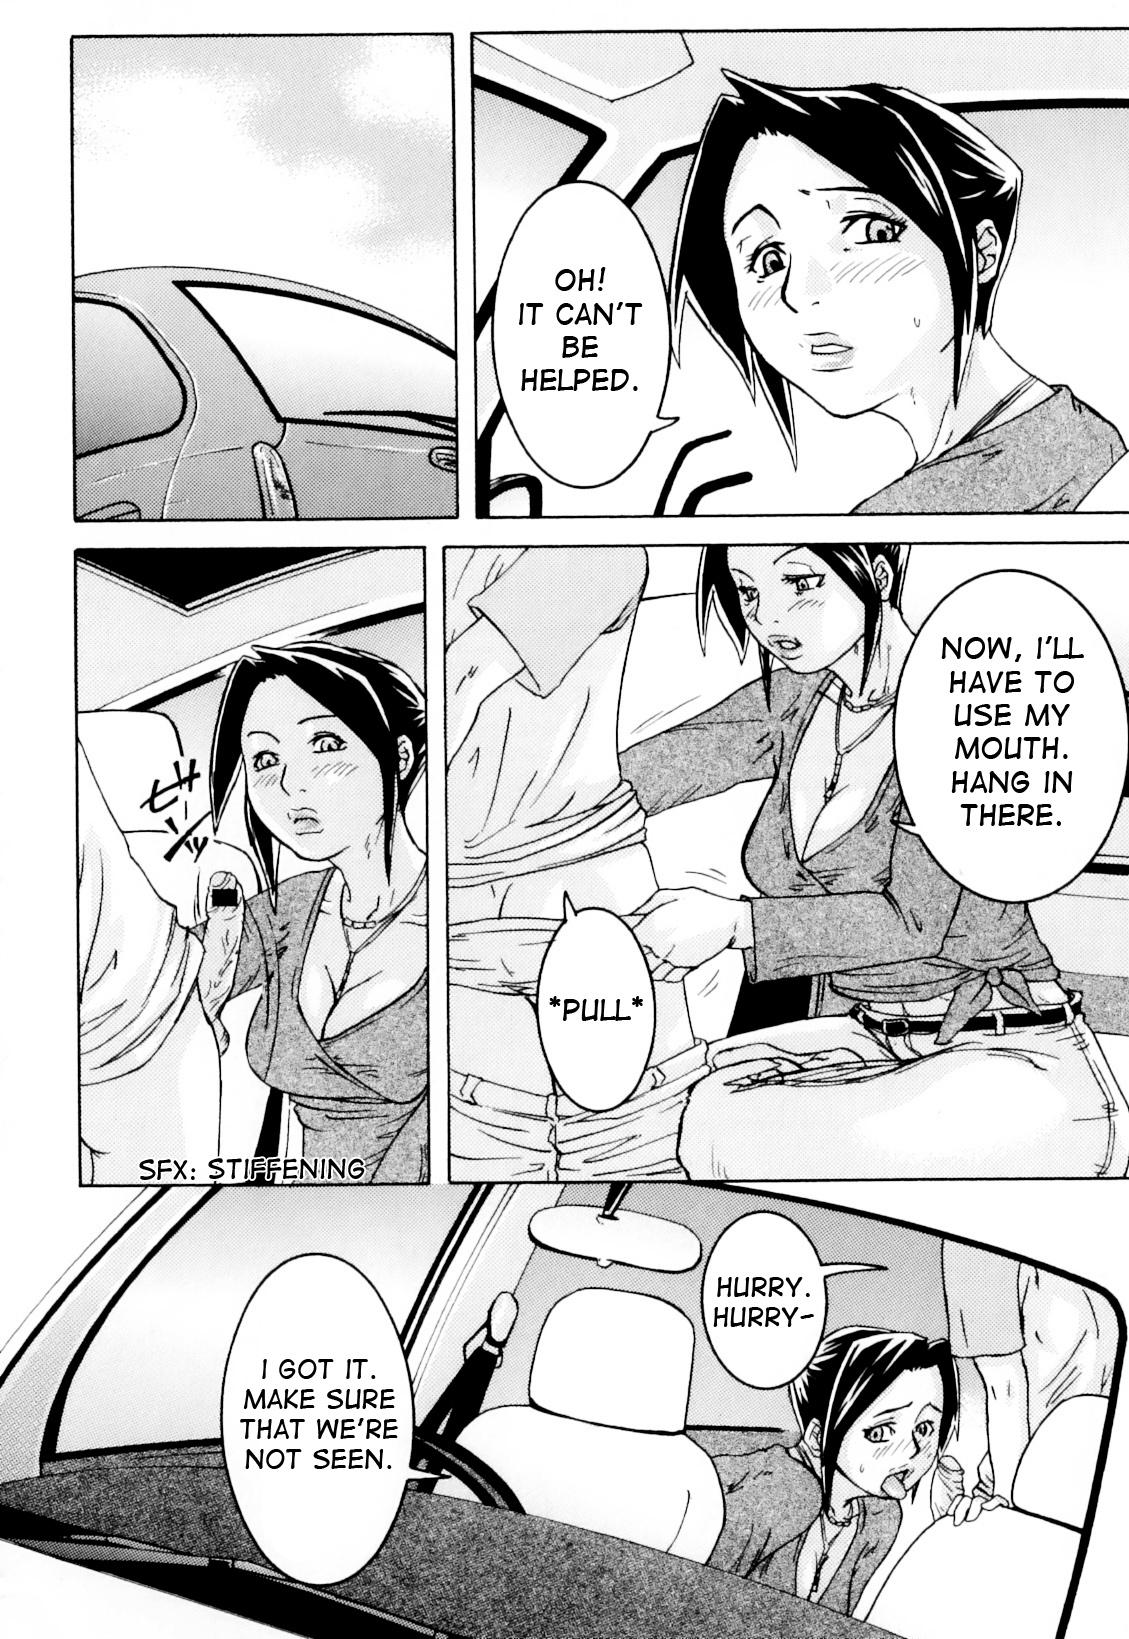 Free Rough Porn Ie made Gaman shinasai! | Wait Until We're Home! Teen Porn - Page 4